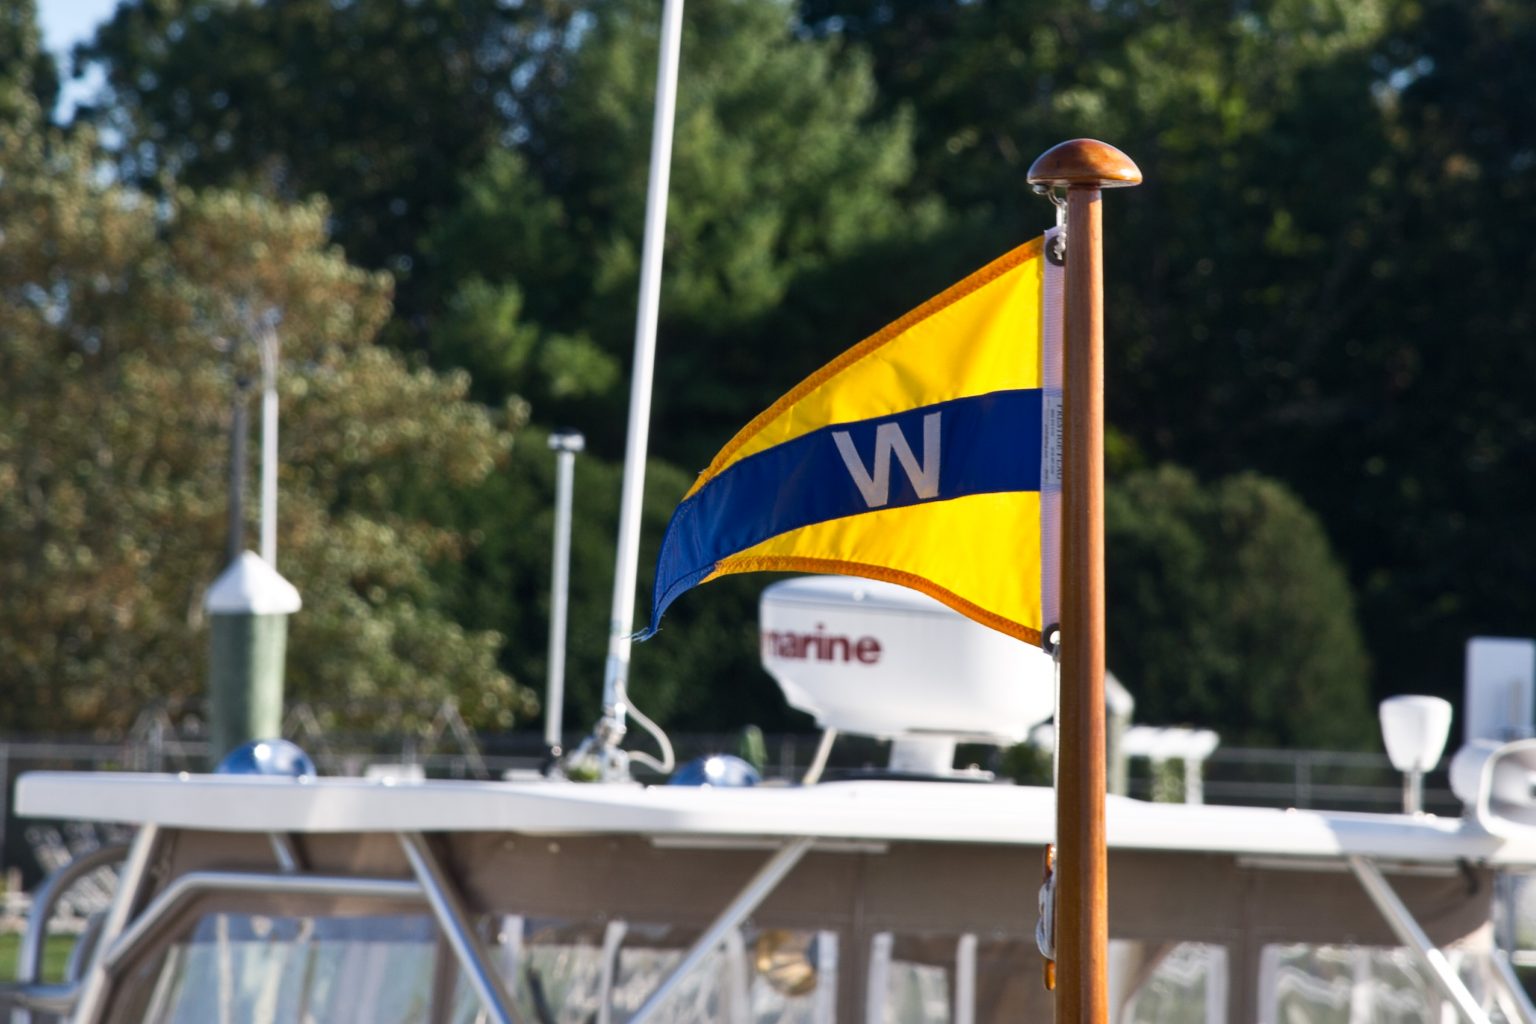 westerly yacht club membership cost